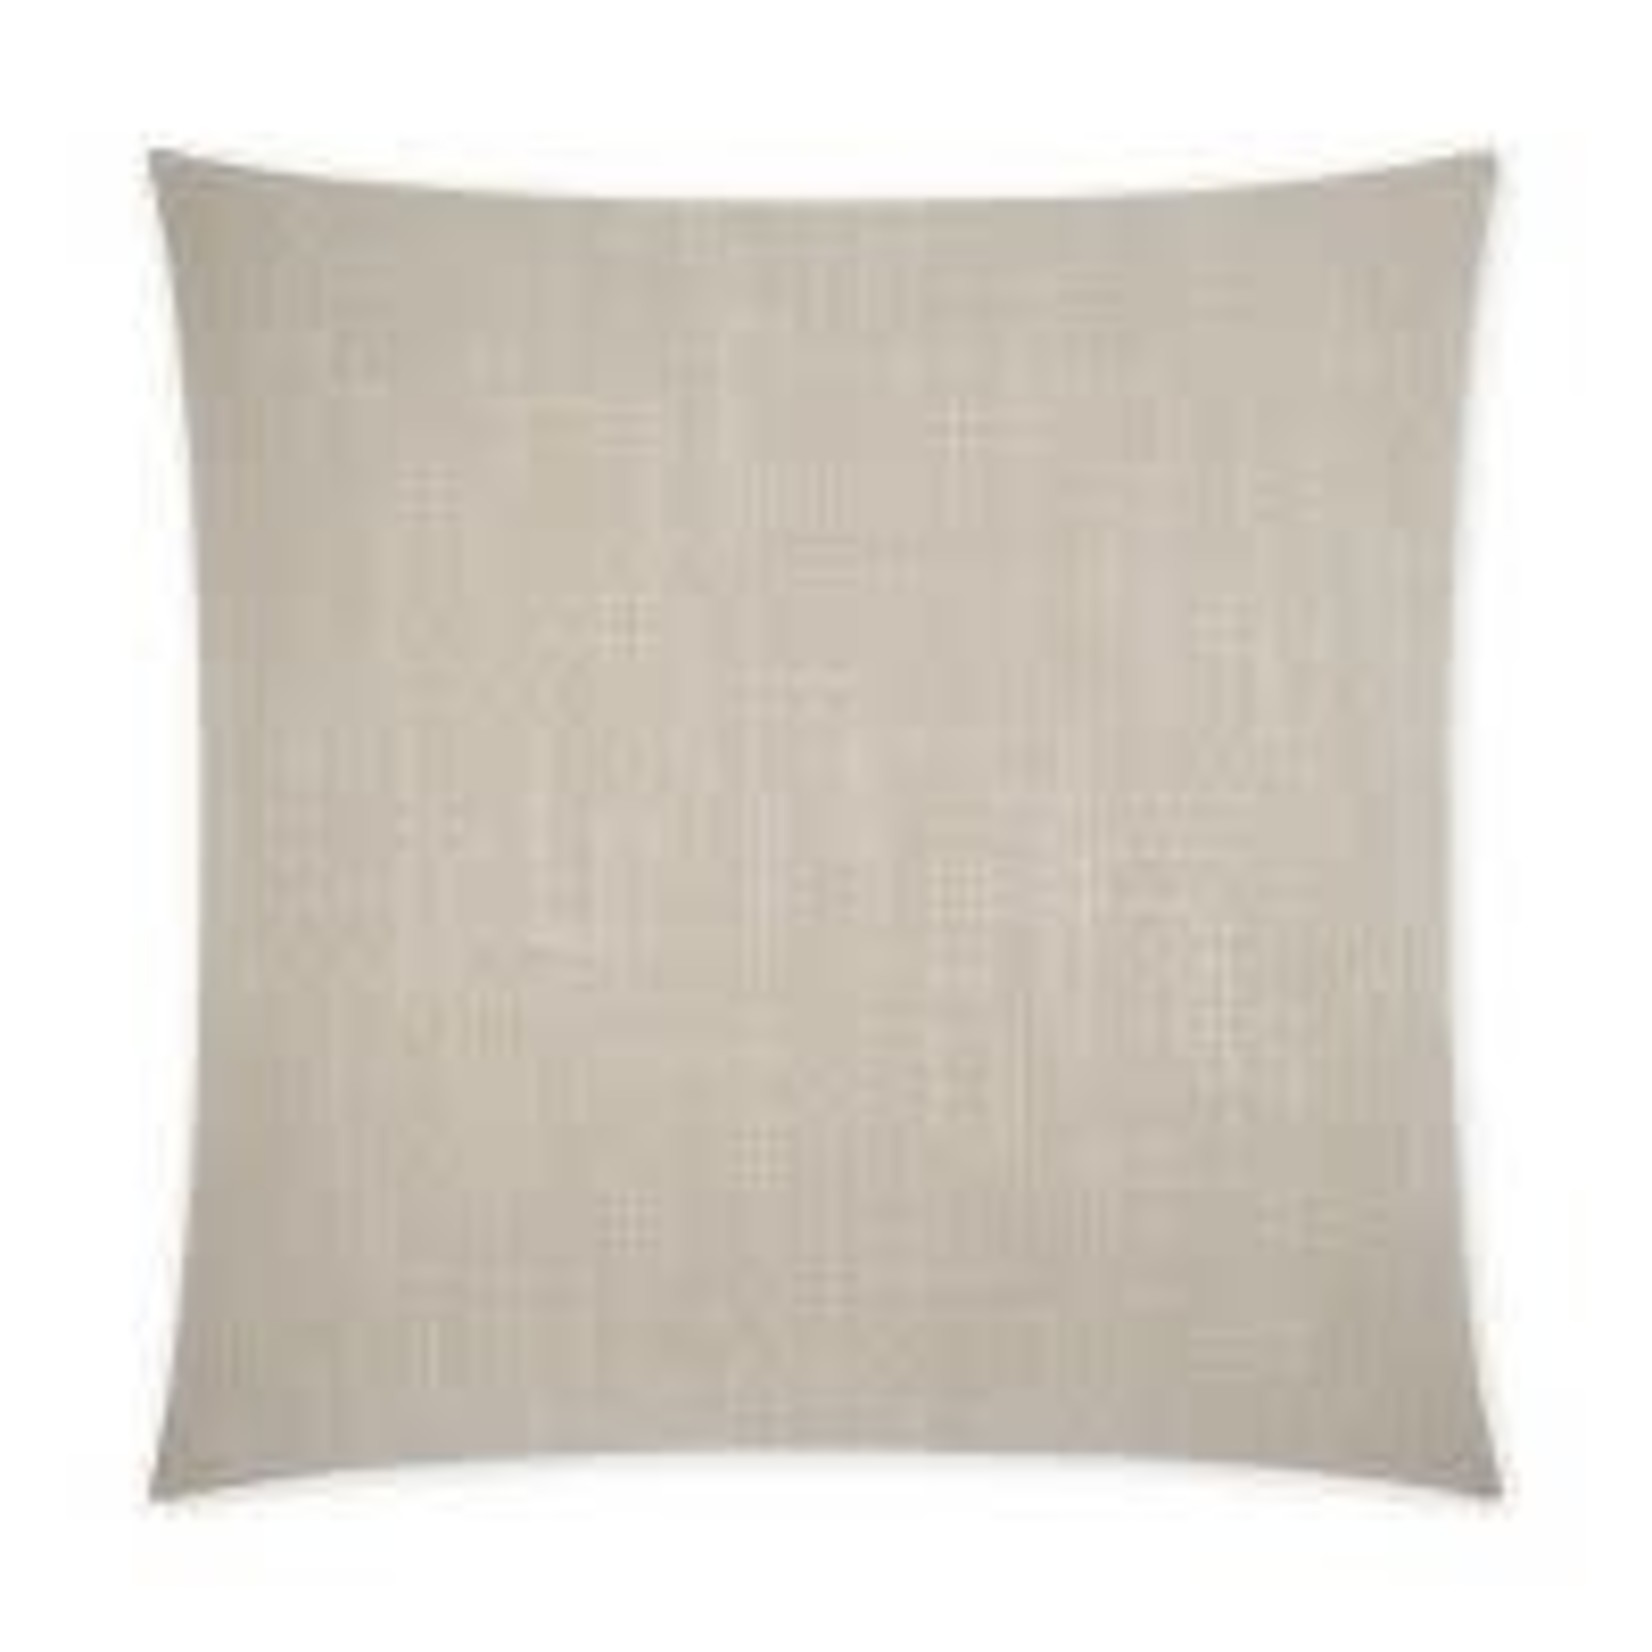 Outside The Box 24x24 Lena Square Feather Down Pillow In Sand